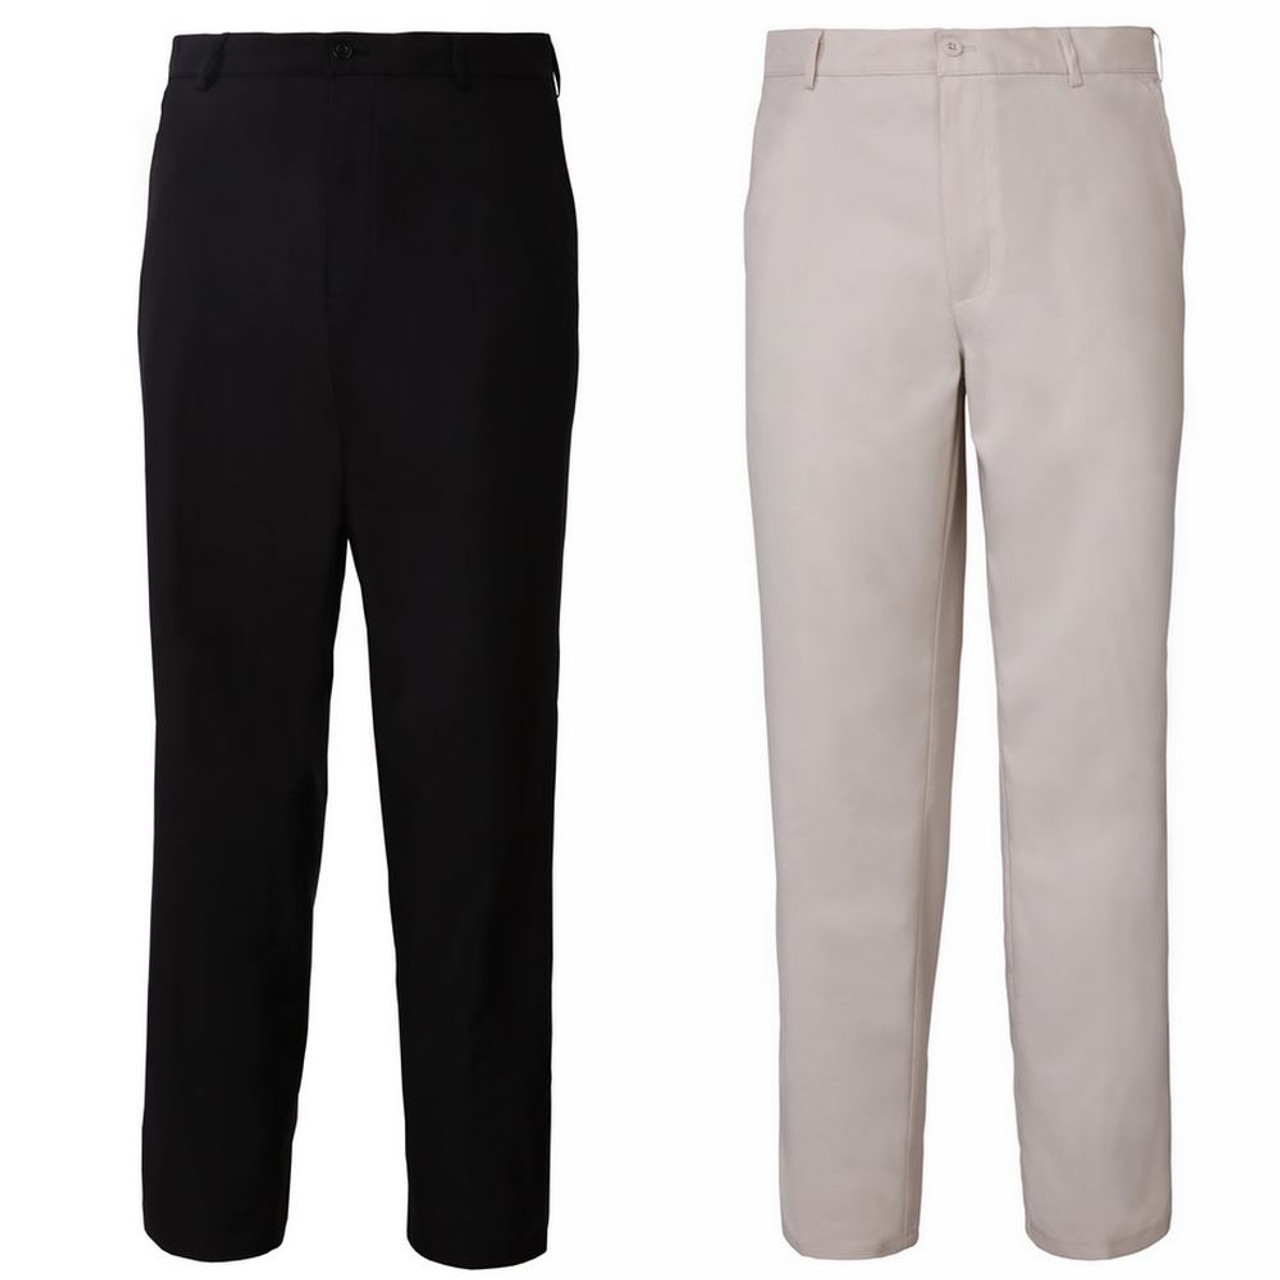 Woodworm Golf 2 Pack Mens Golf Trousers, 1 Black and 1 Beige - Woodworm.tv